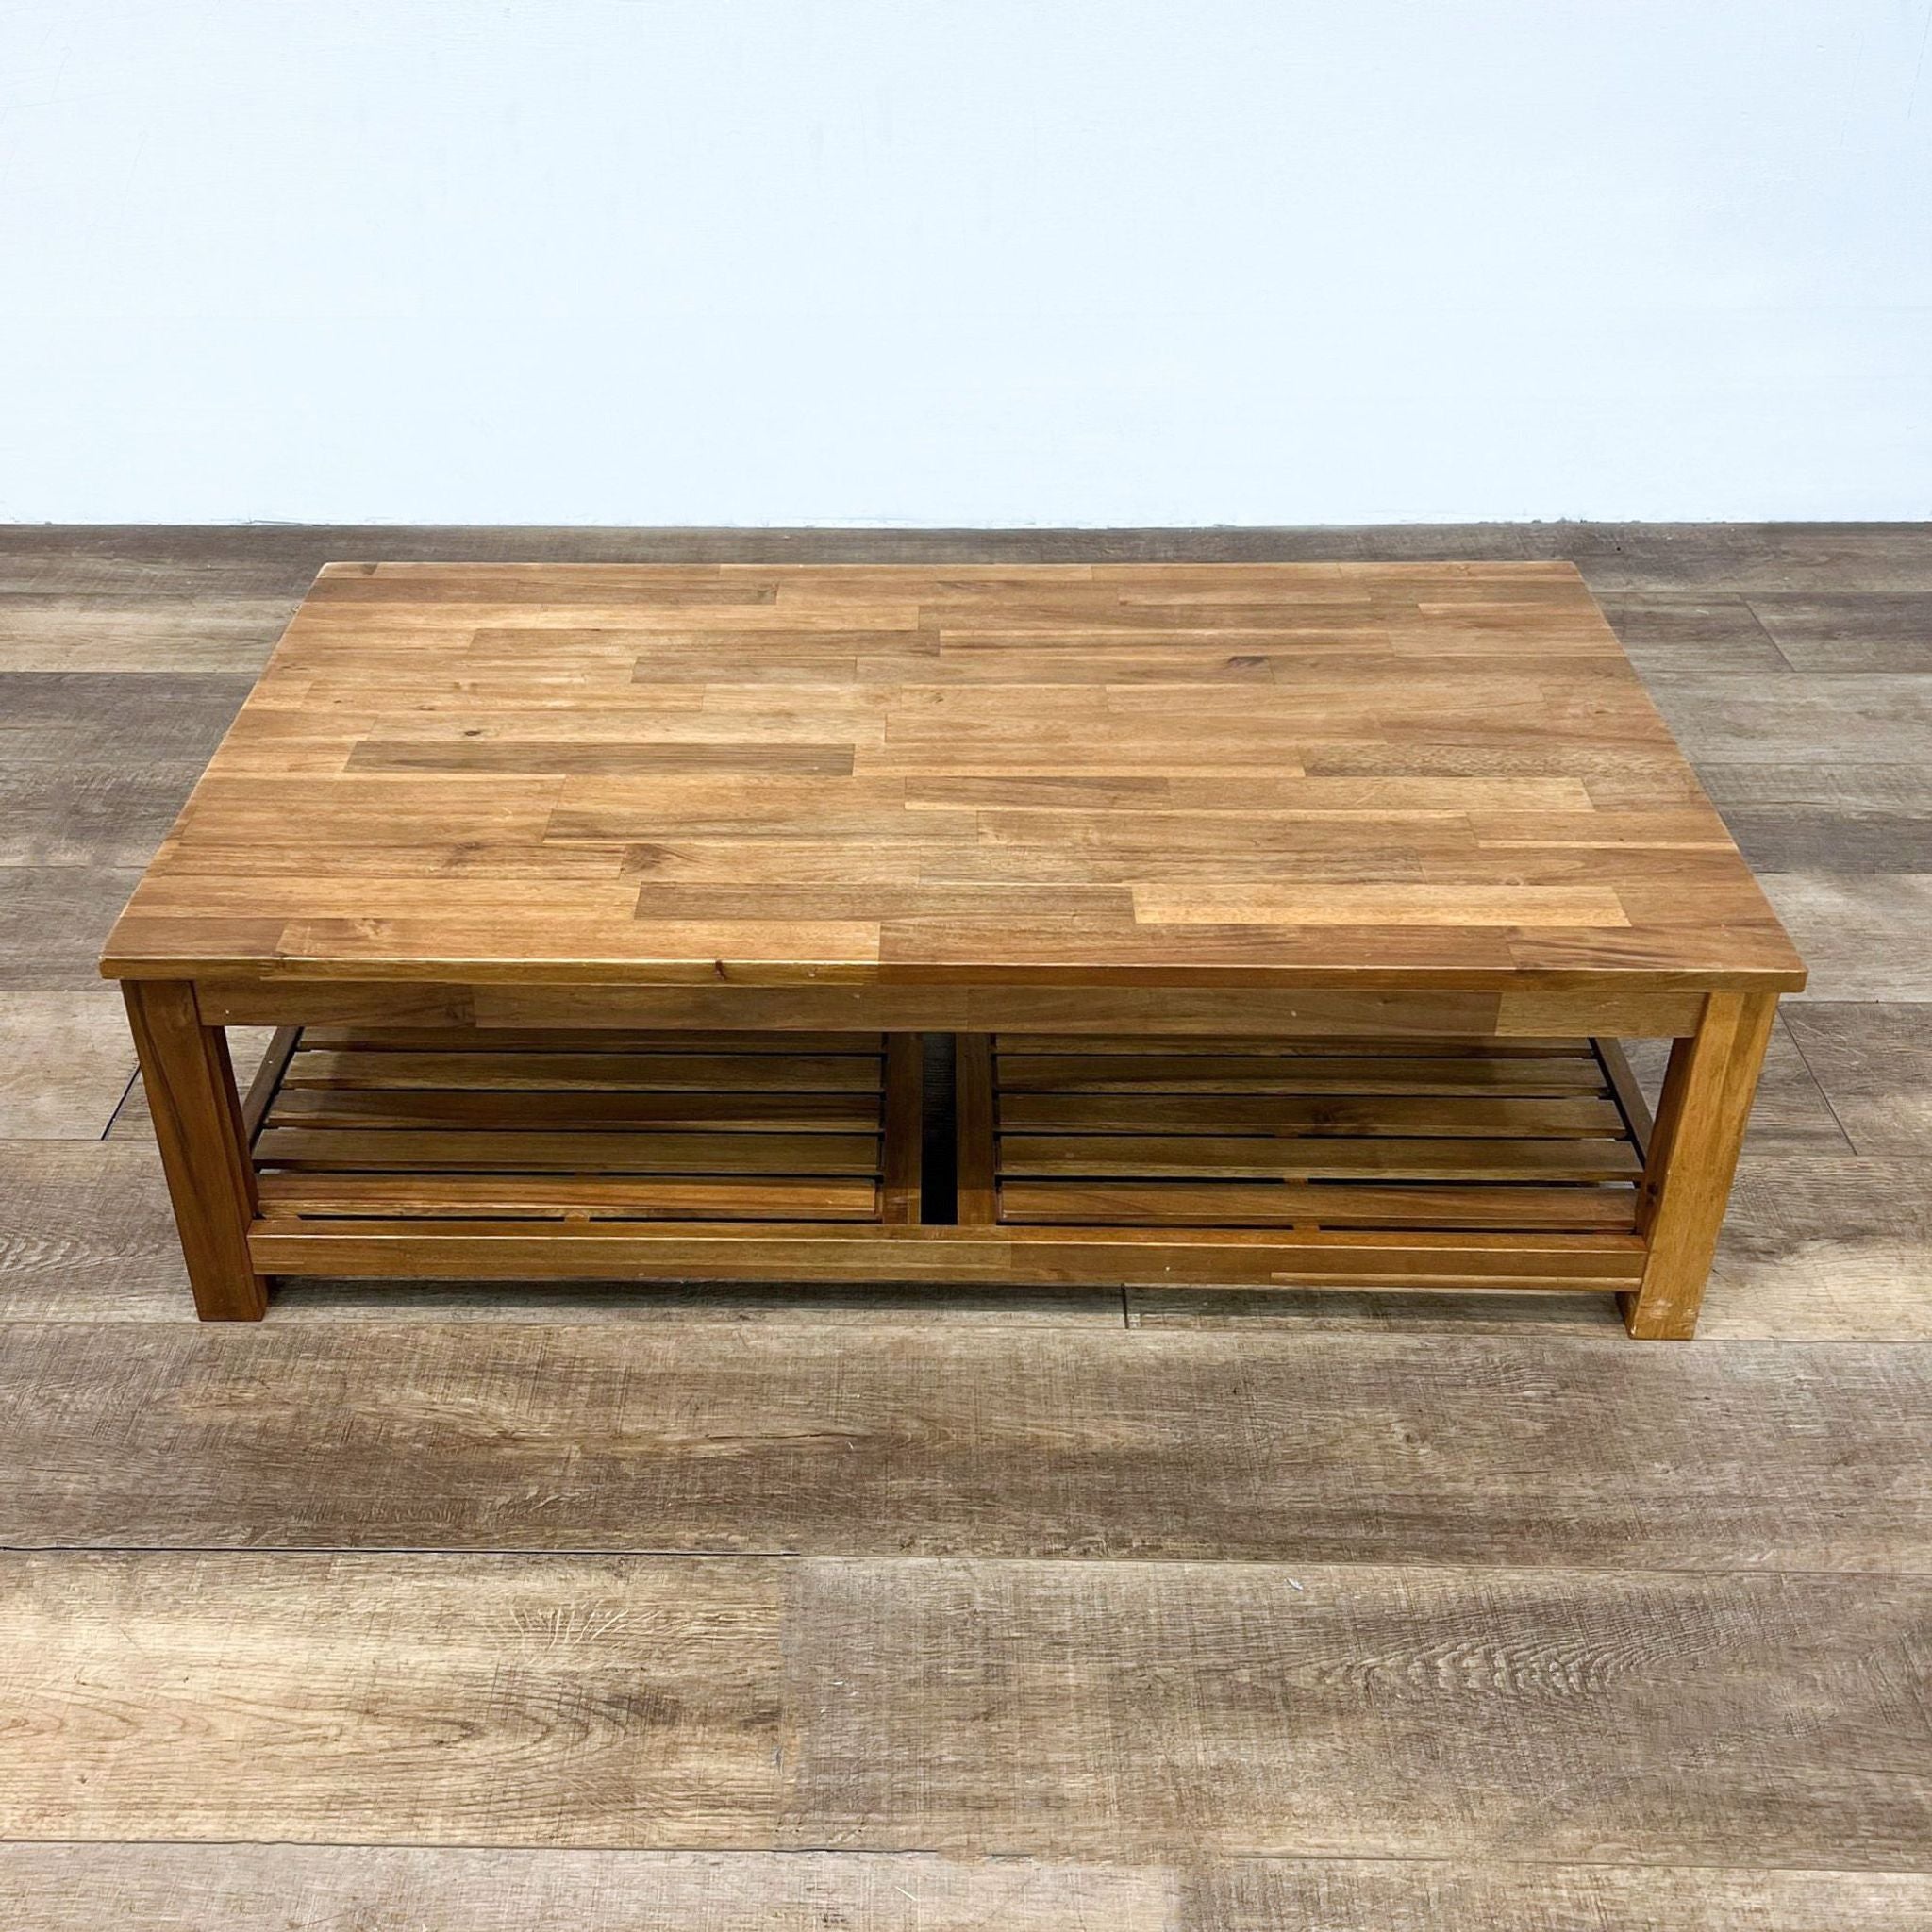 Reperch brand wooden coffee table with a parquet-style top and lower shelf, on a laminate floor.